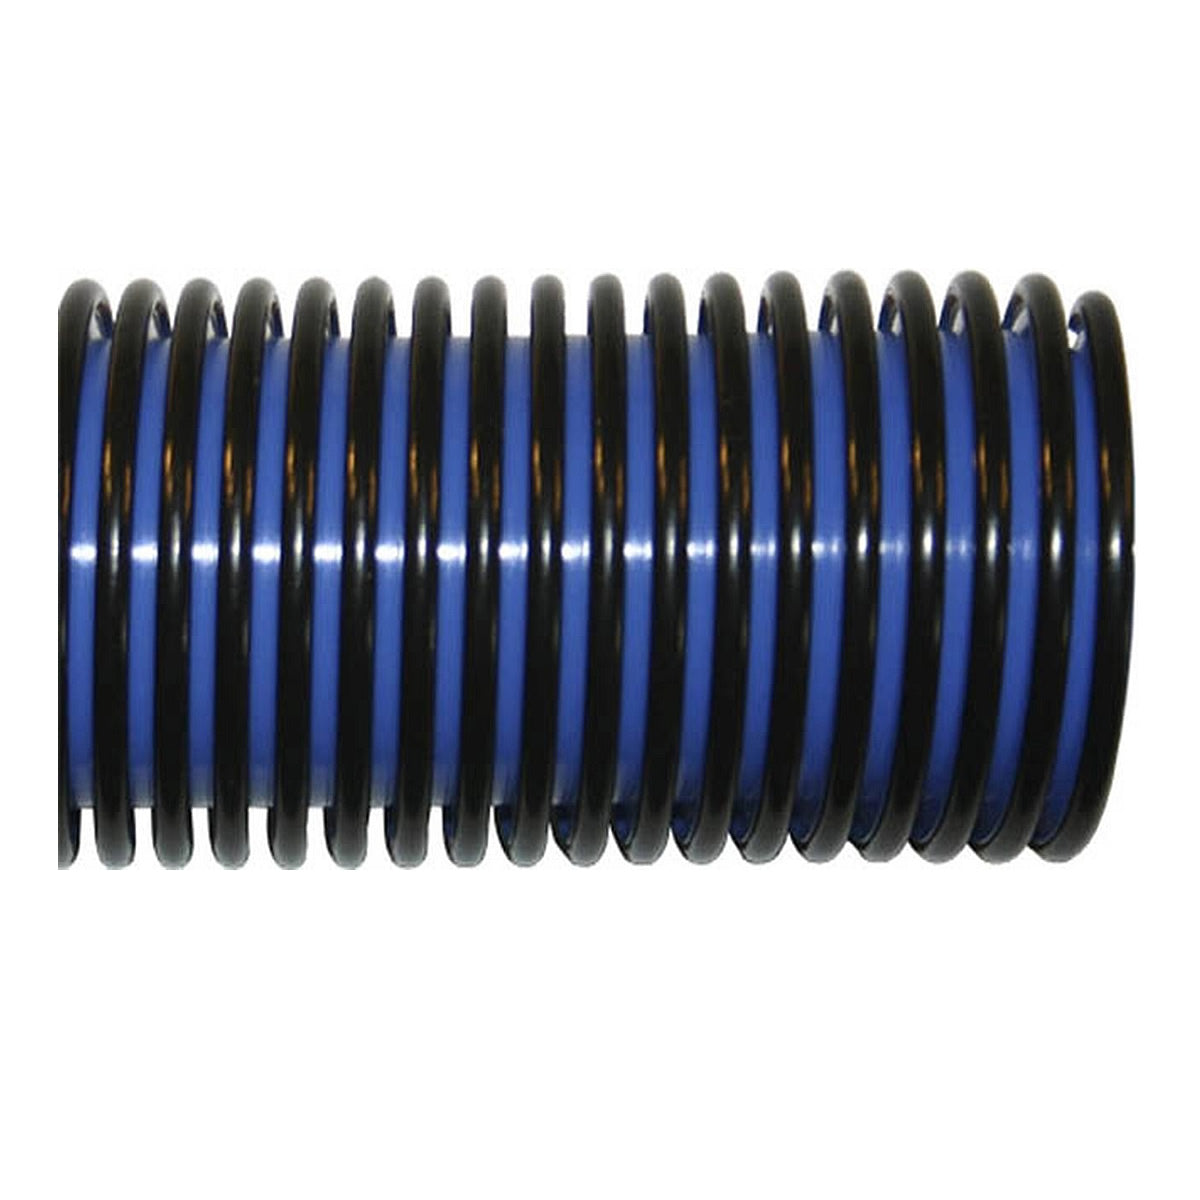 Double K Hose, 1-1/2" for 2000 Series, Airmax, Extreme, 850 Dryers-Pet's Choice Supply